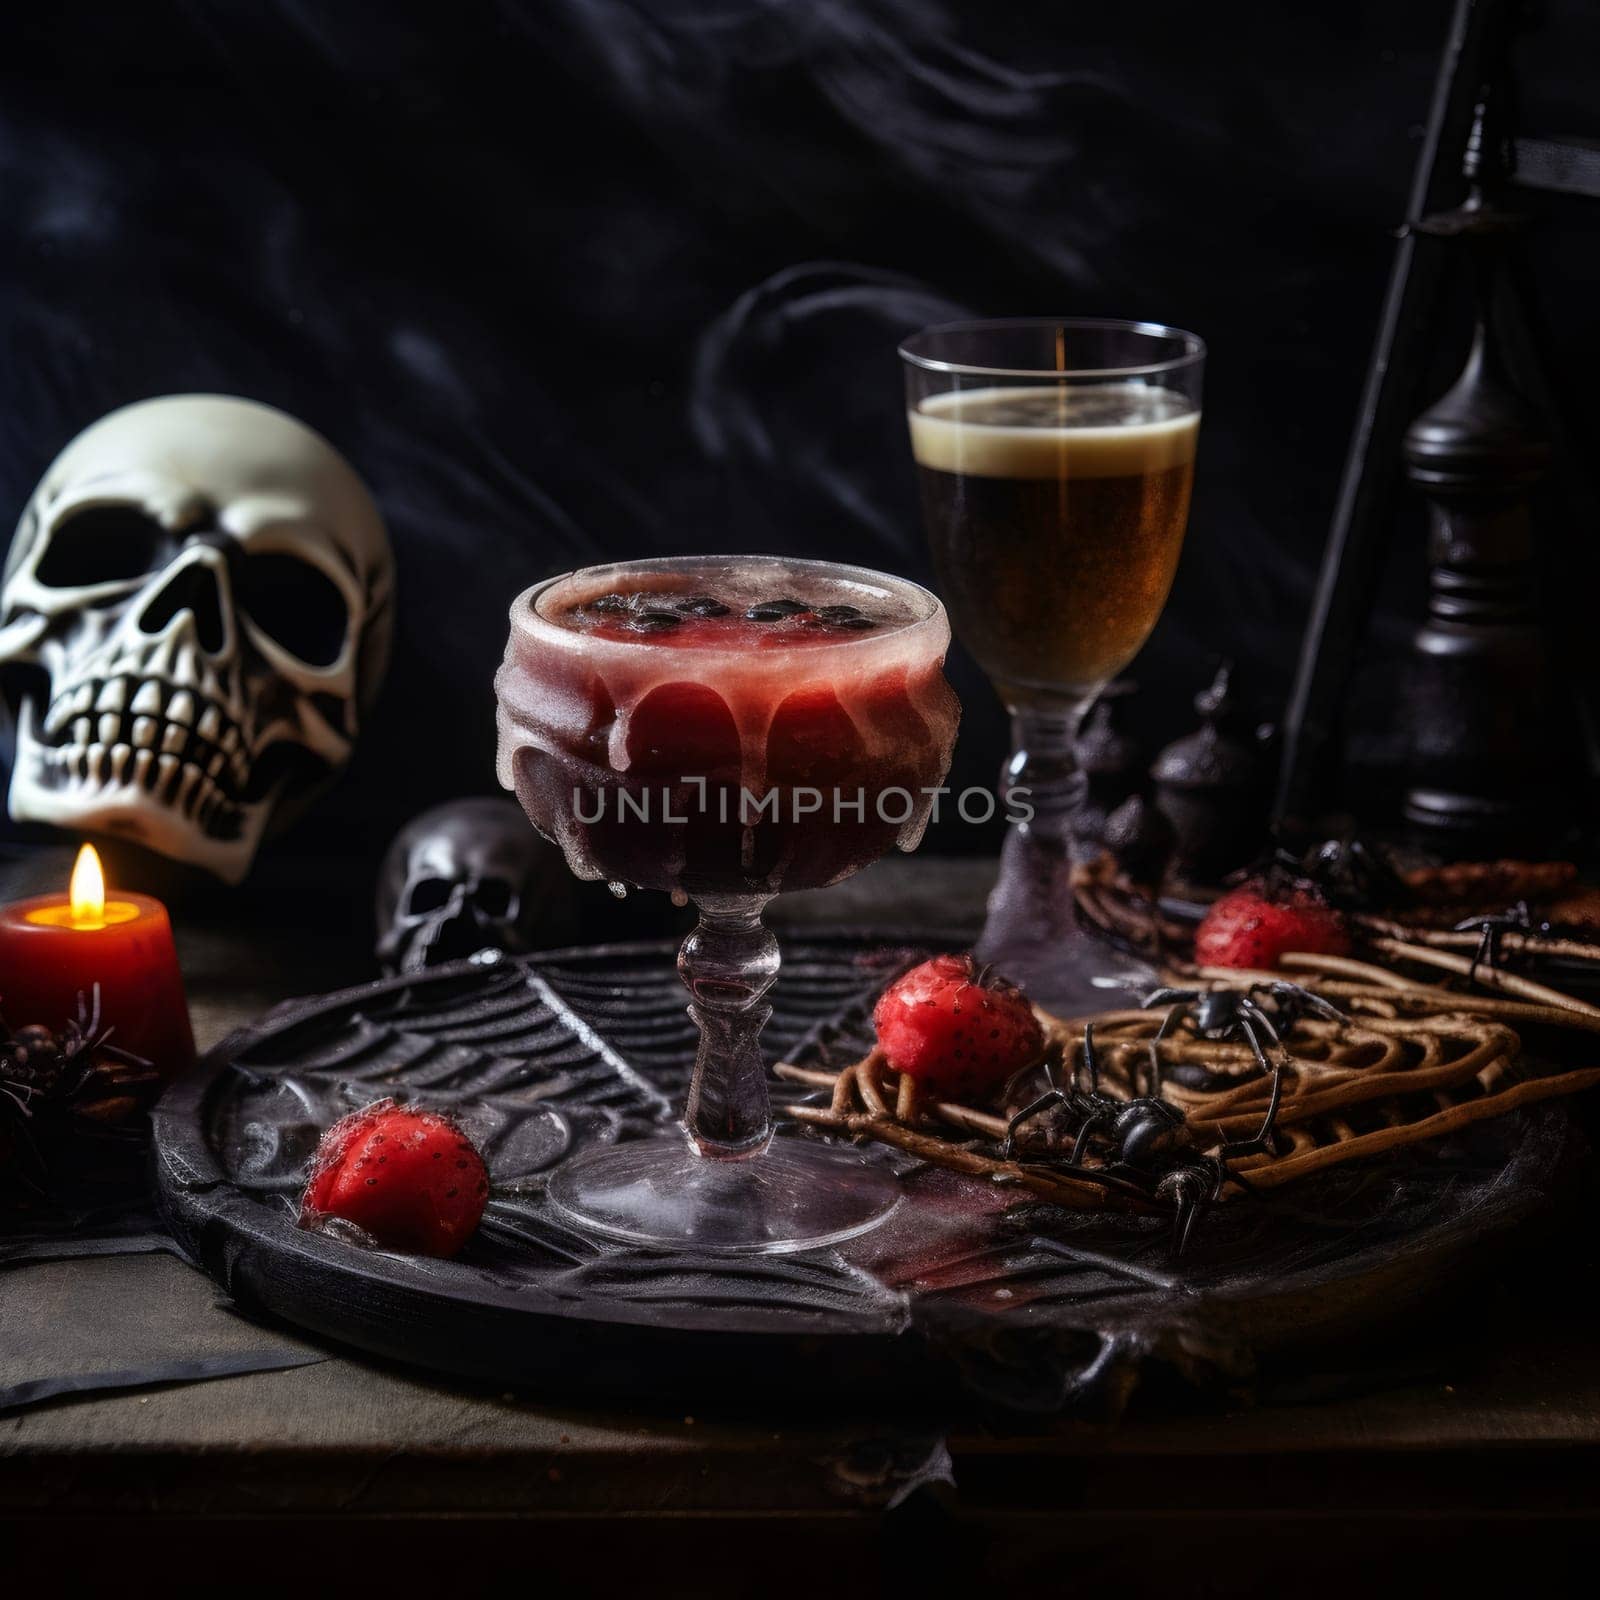 A vintage glass with a red poisonous drink and smudges stands on a wooden plate a cobweb with a burning candle and a skeleton skull on the table in a dark room, side view close-up.